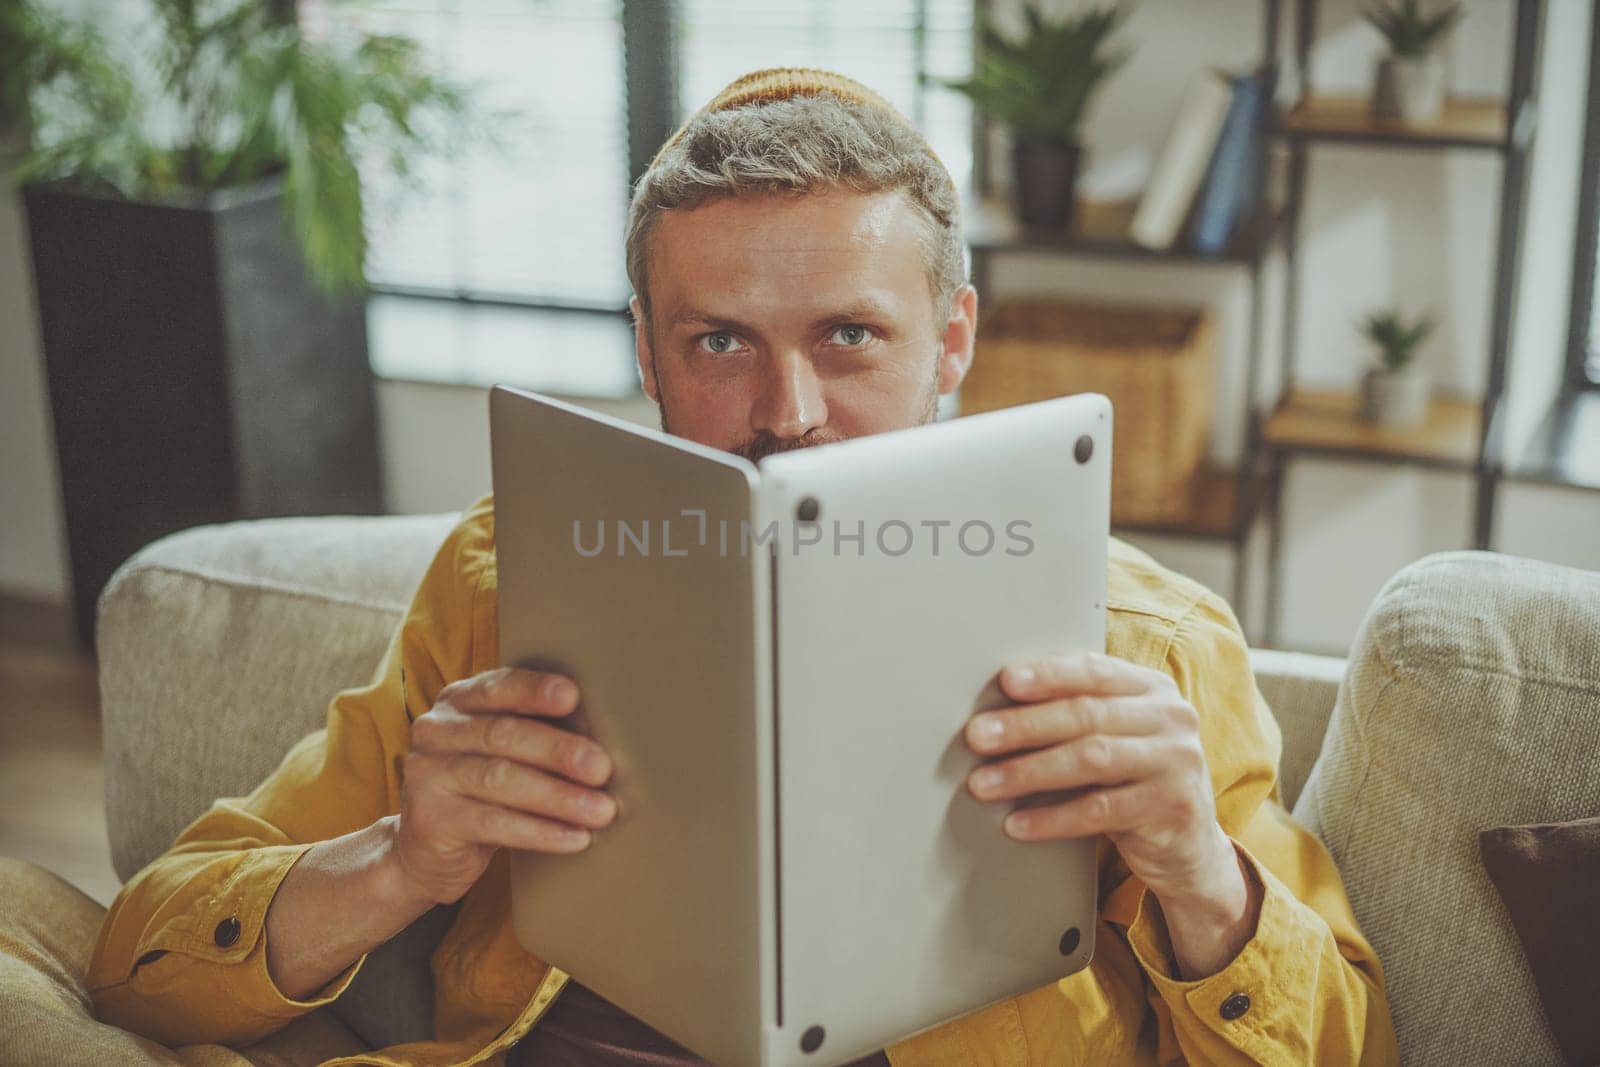 Humorous stock photo concept of bad student who engaged in unproductive studying habits. Guy holding laptop if it were book, highlighting lack of focus and attention to task at hand. High quality photo